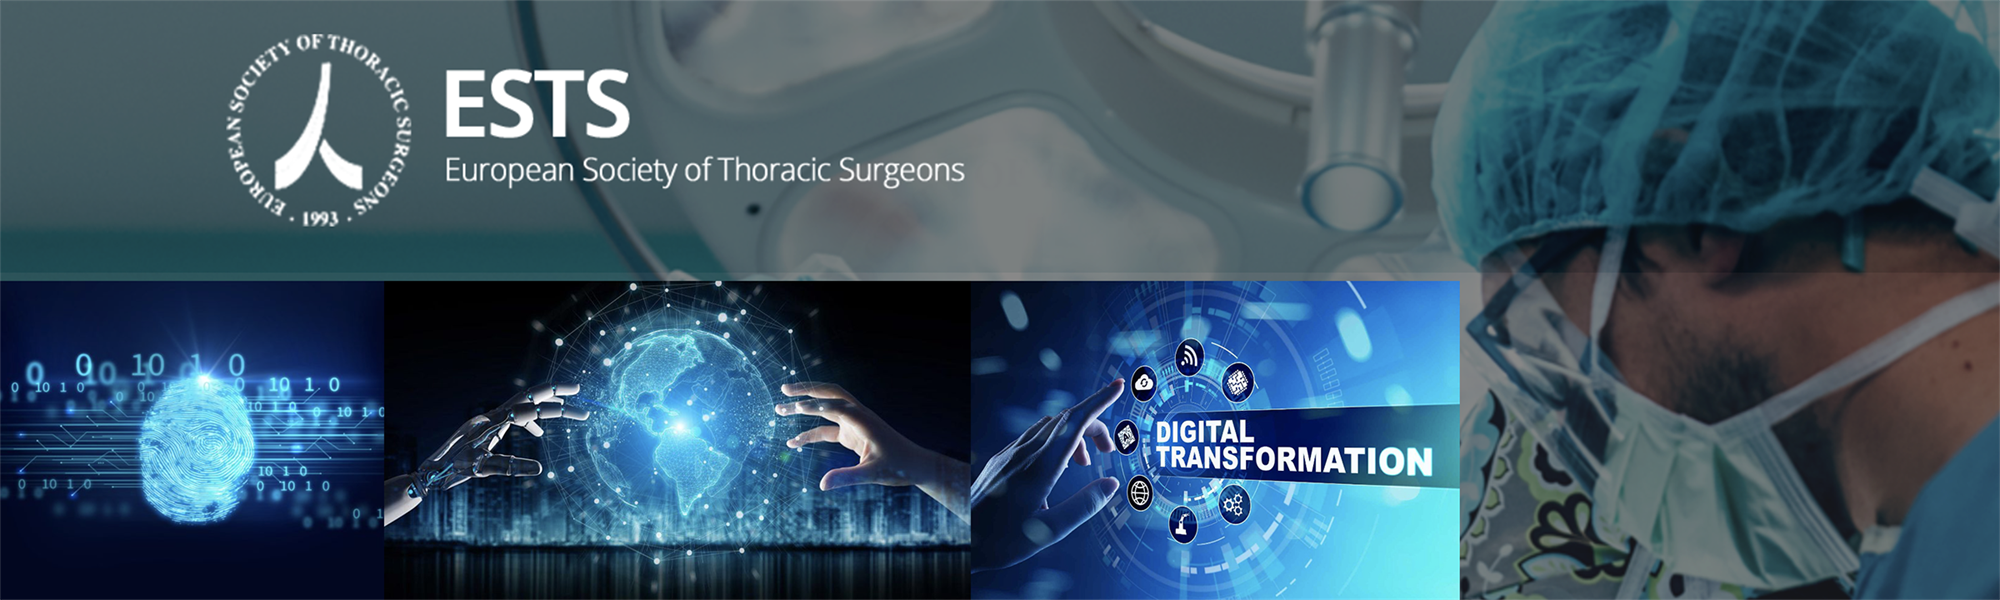 New Survey:  Digital Transformation in Thoracic Surgery image